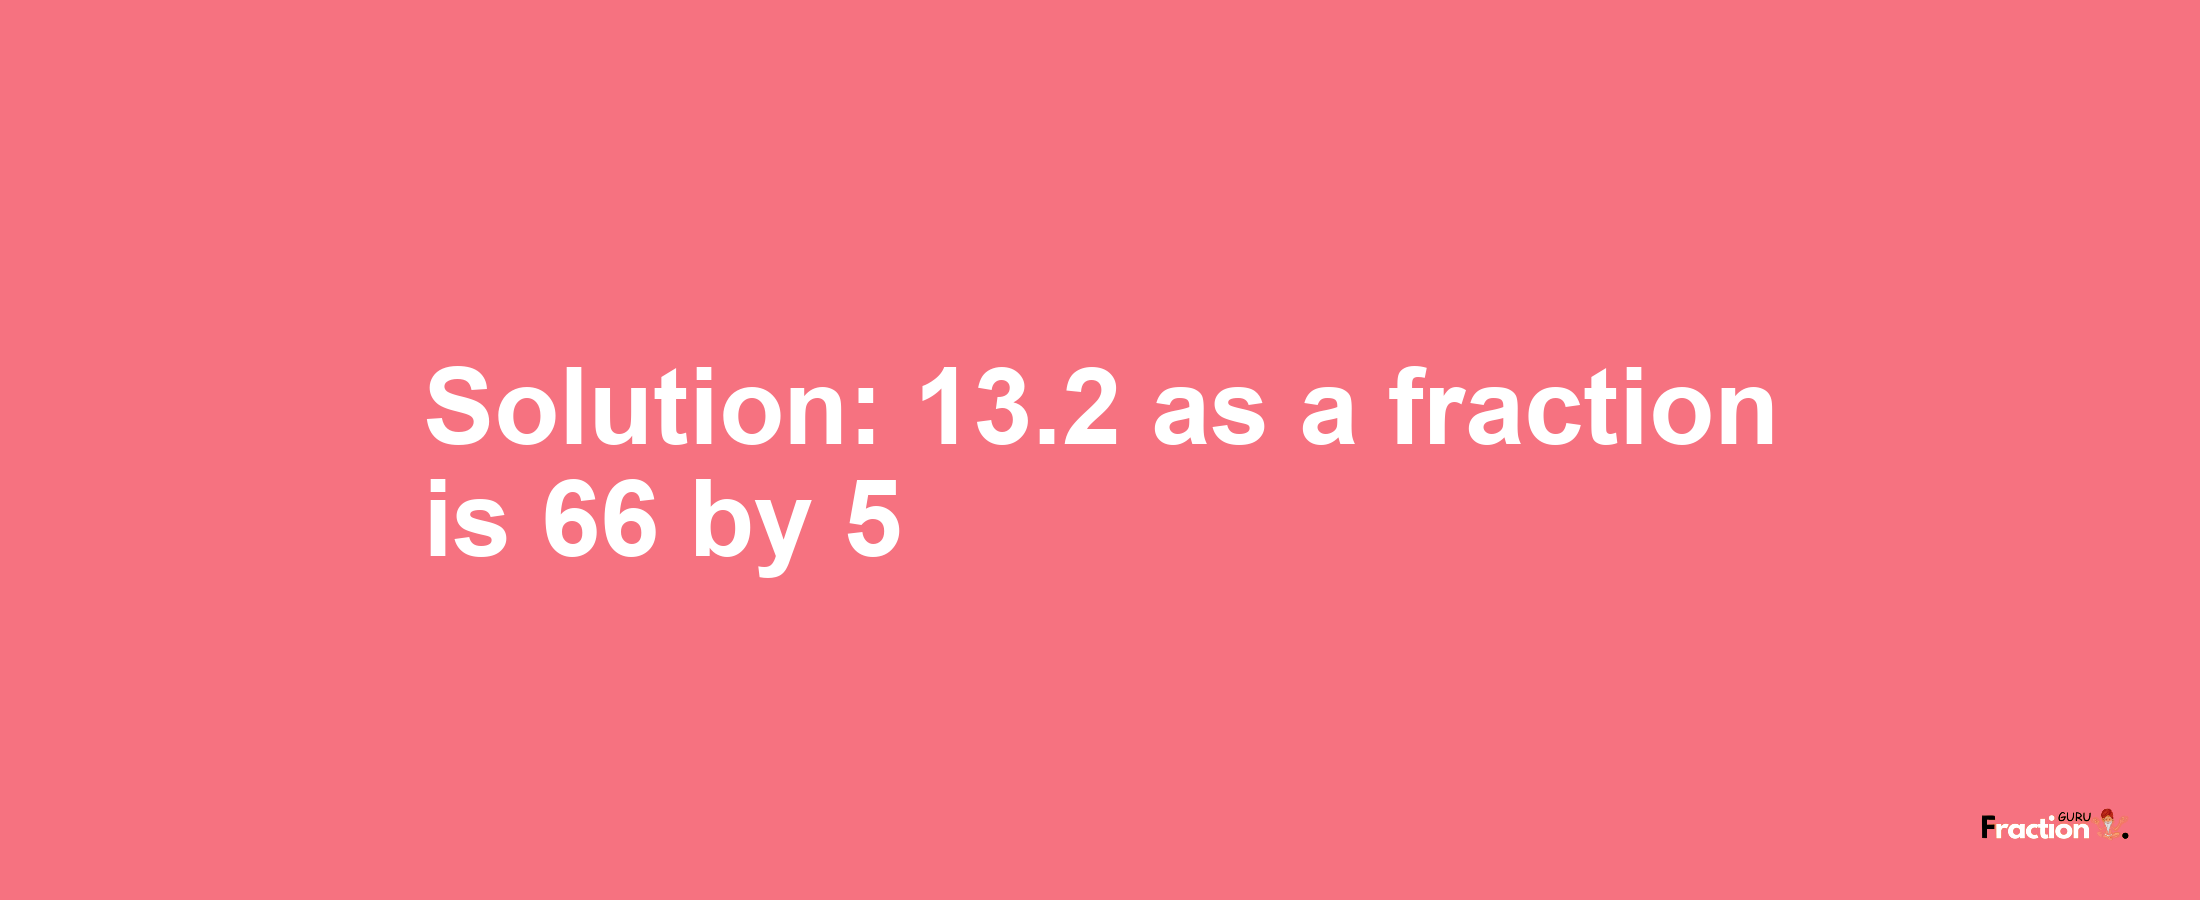 Solution:13.2 as a fraction is 66/5